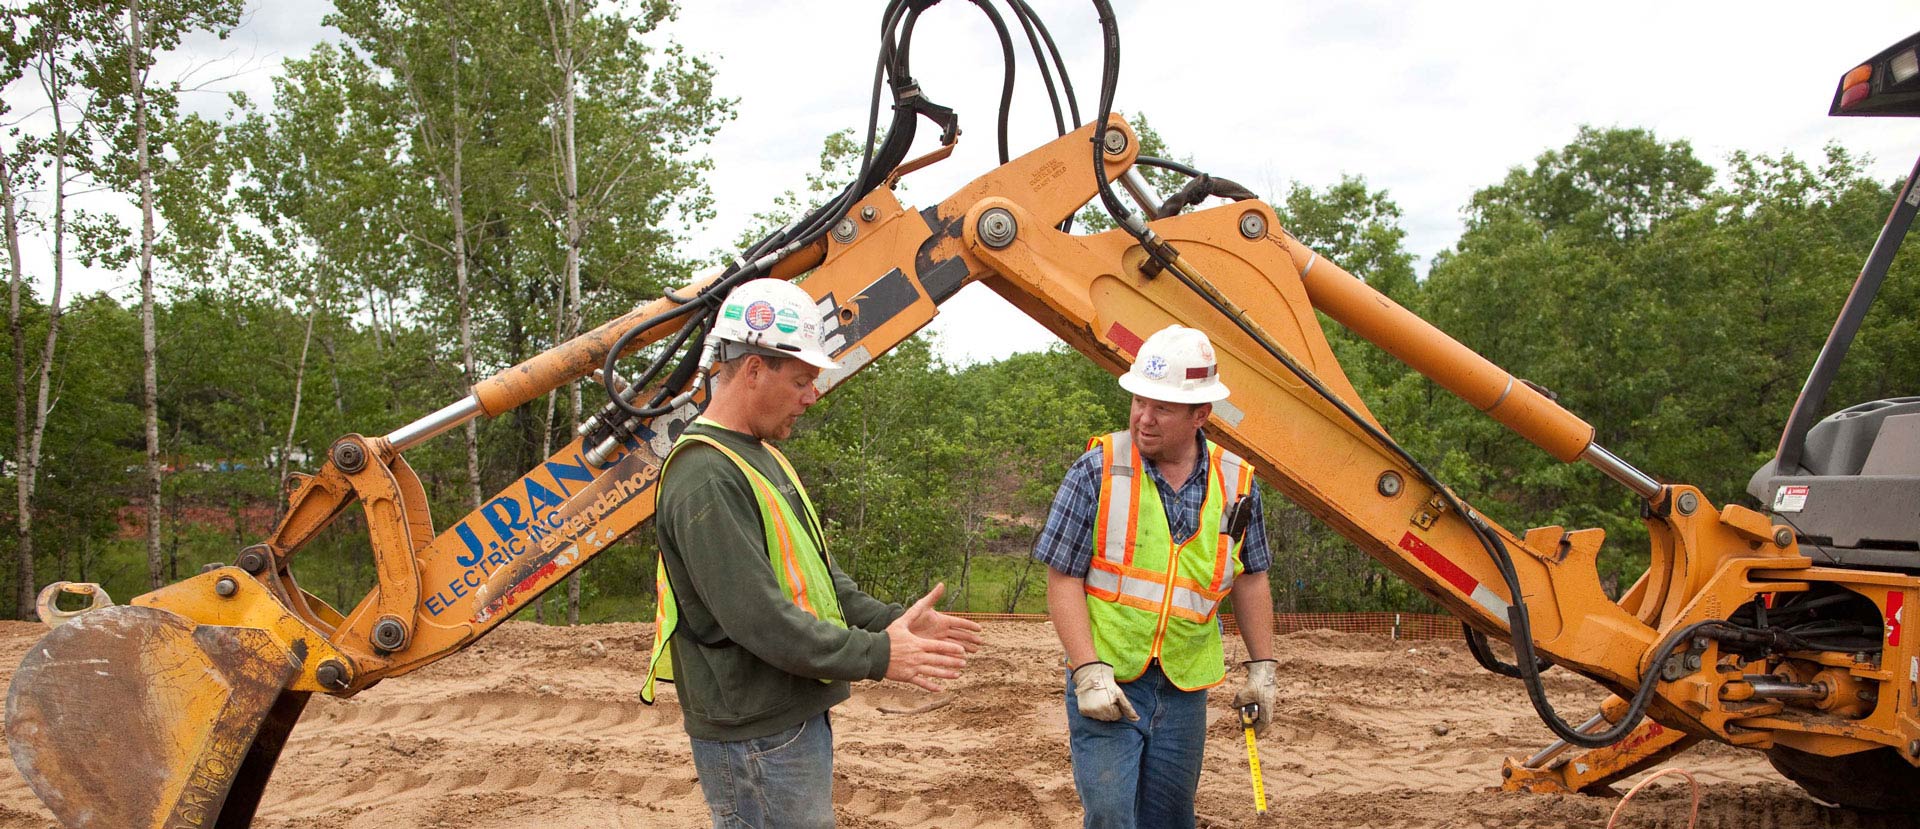 Construction worksers discuss plan for work in front of excavator arm